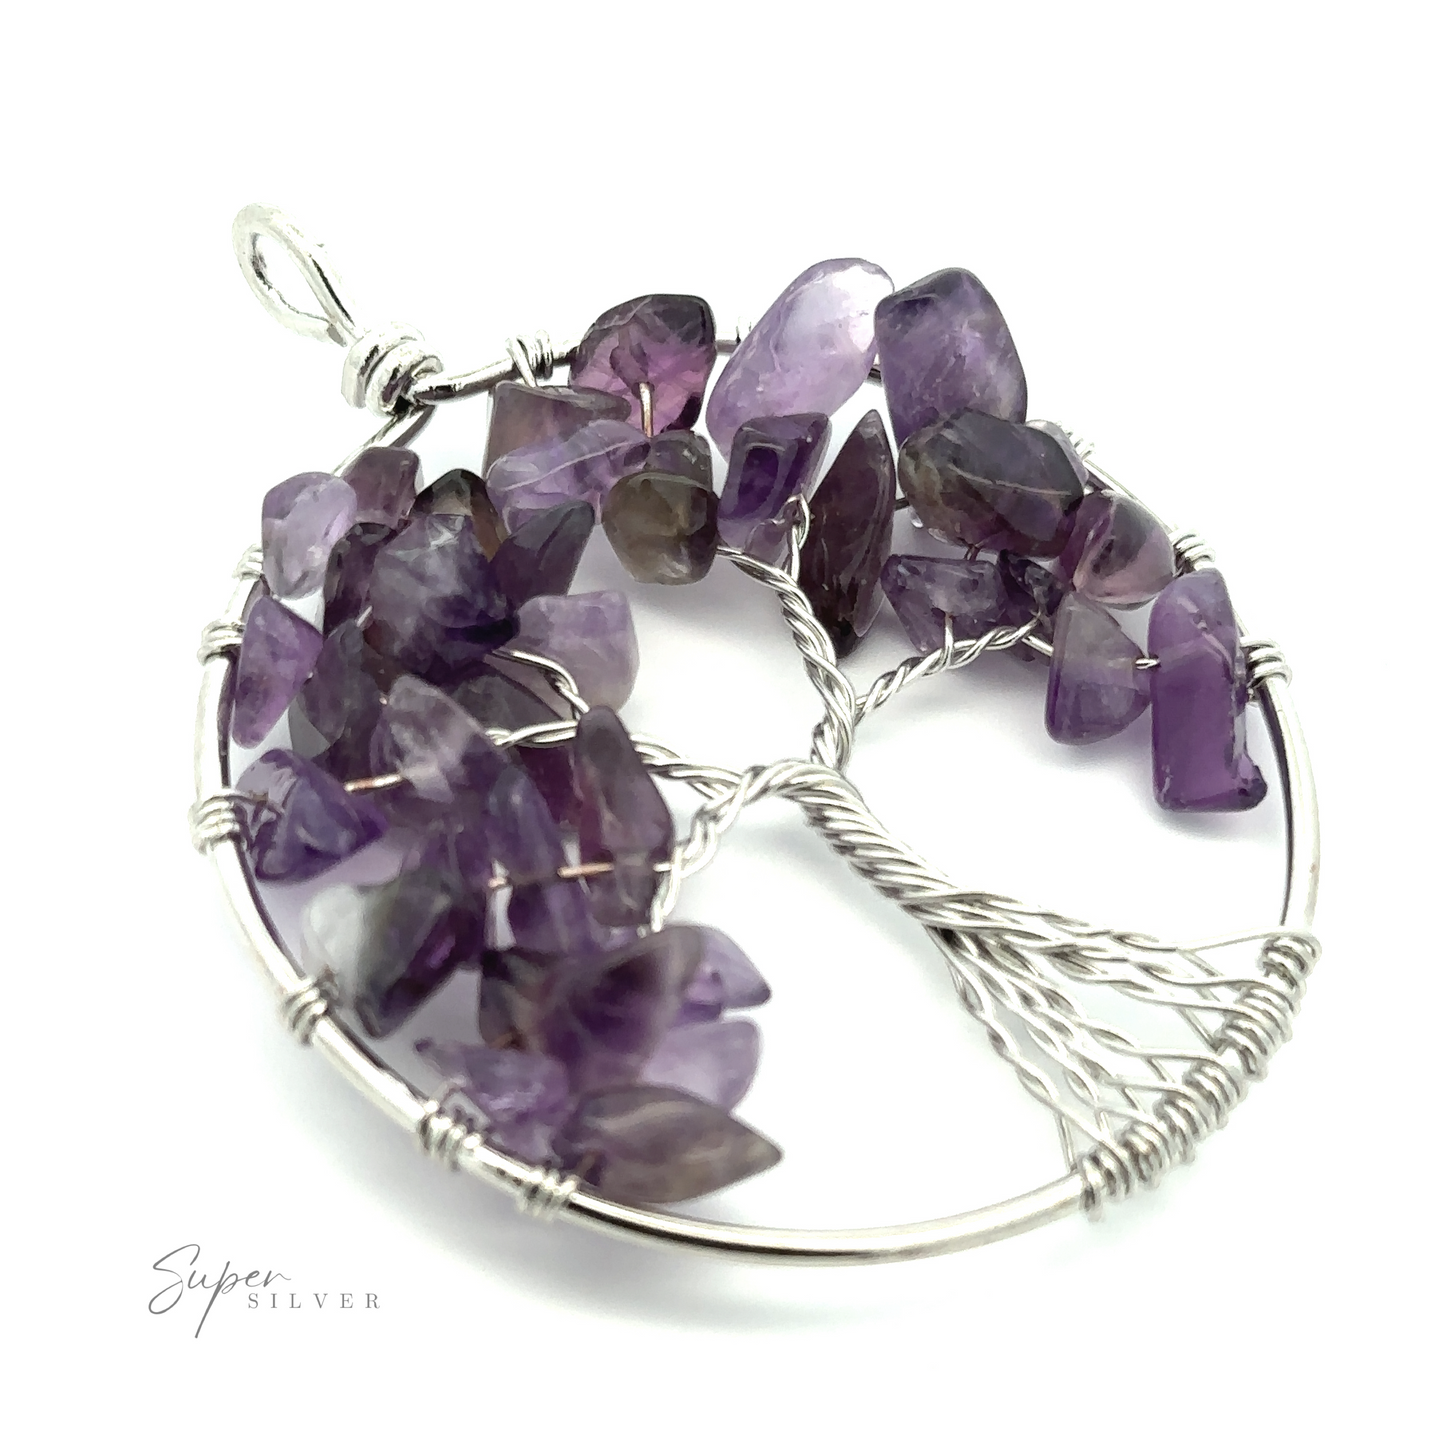 
                  
                    A Wire Wrapped Tree of Life Pendant featuring a wireframe tree design, adorned with purple semi-precious gemstones, likely amethyst, against a white background. The mixed metals add a unique touch to this beautiful piece.
                  
                